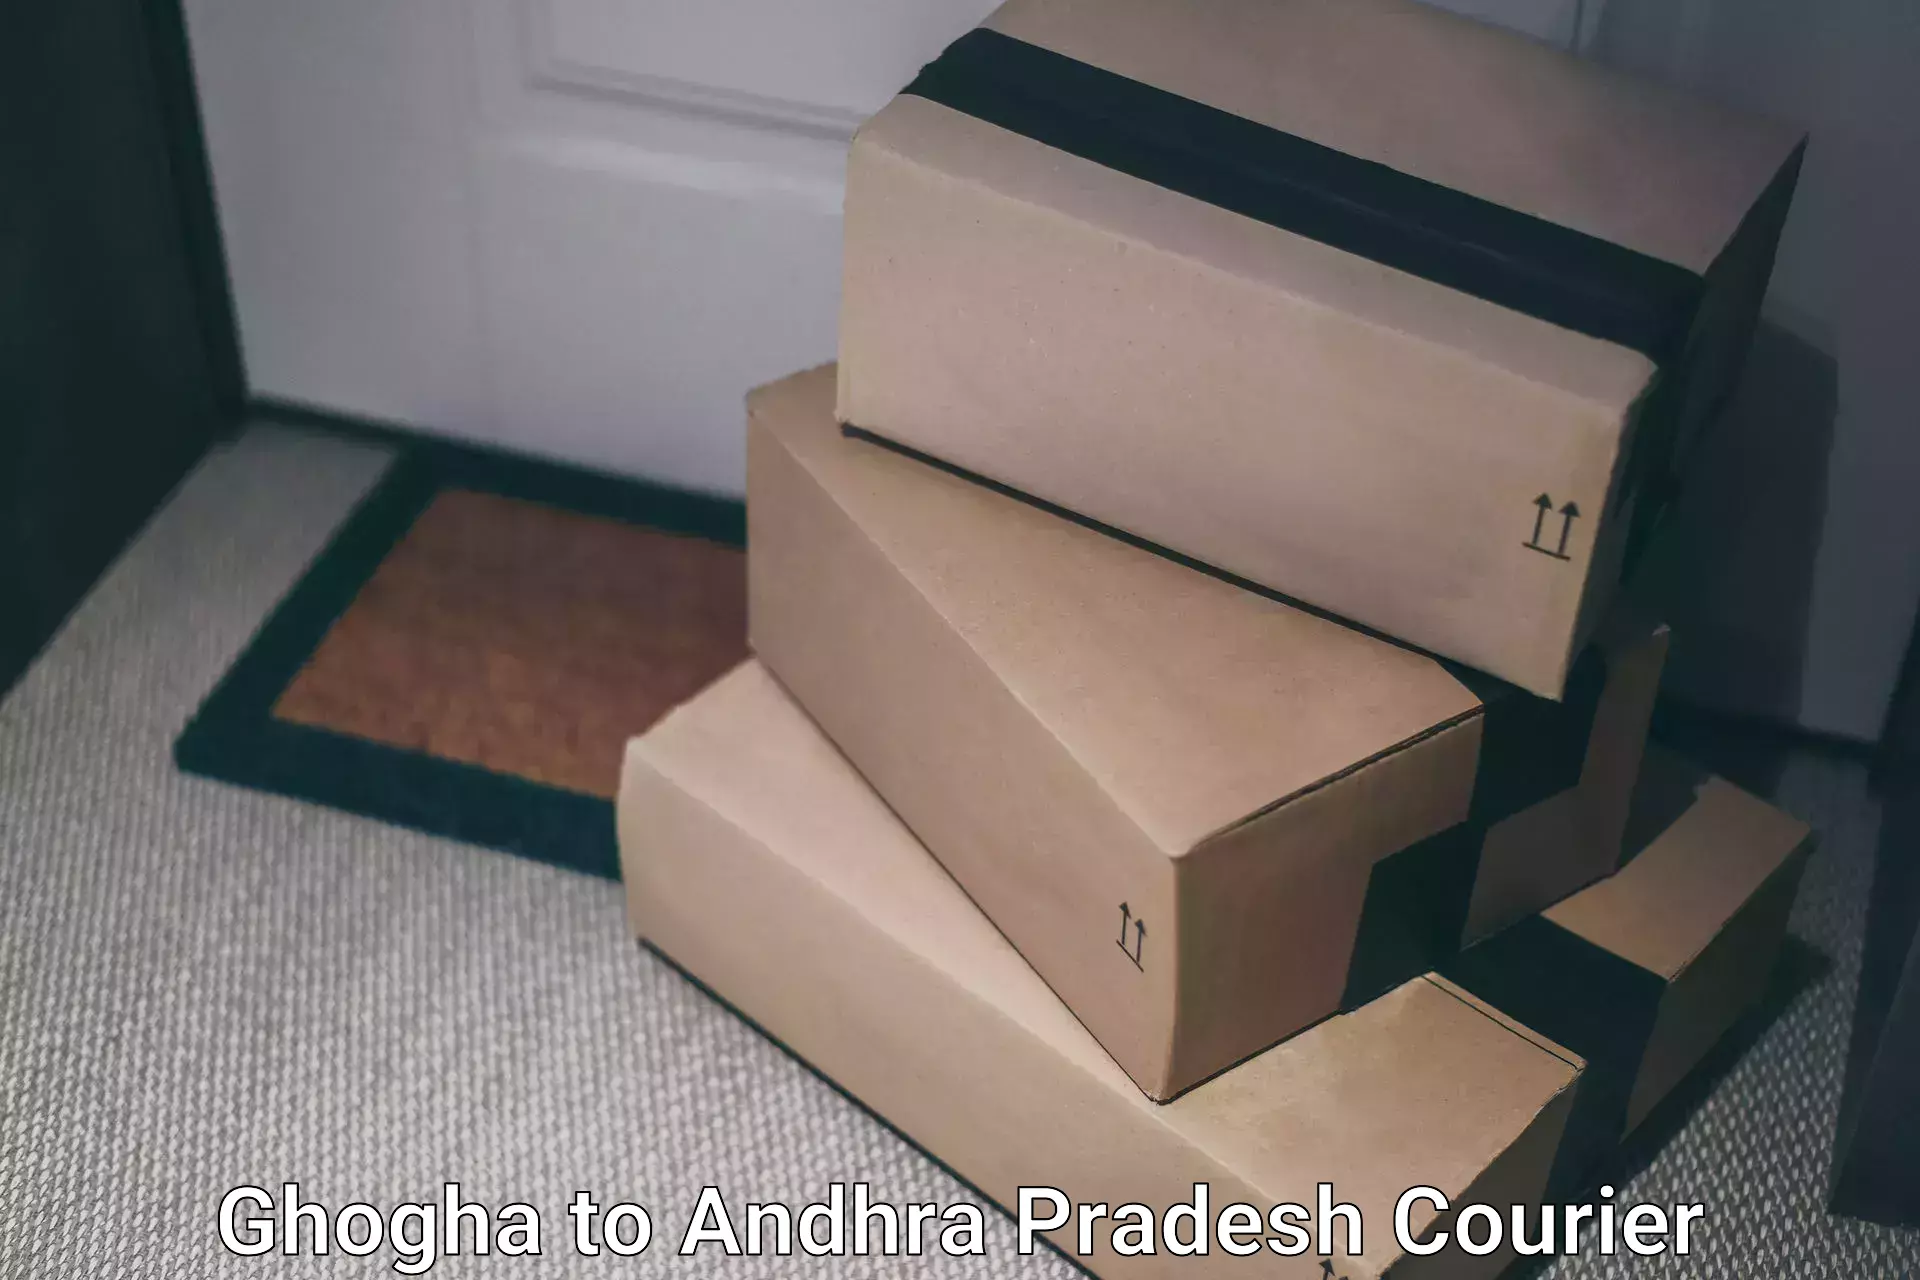 Courier service efficiency Ghogha to Bobbili